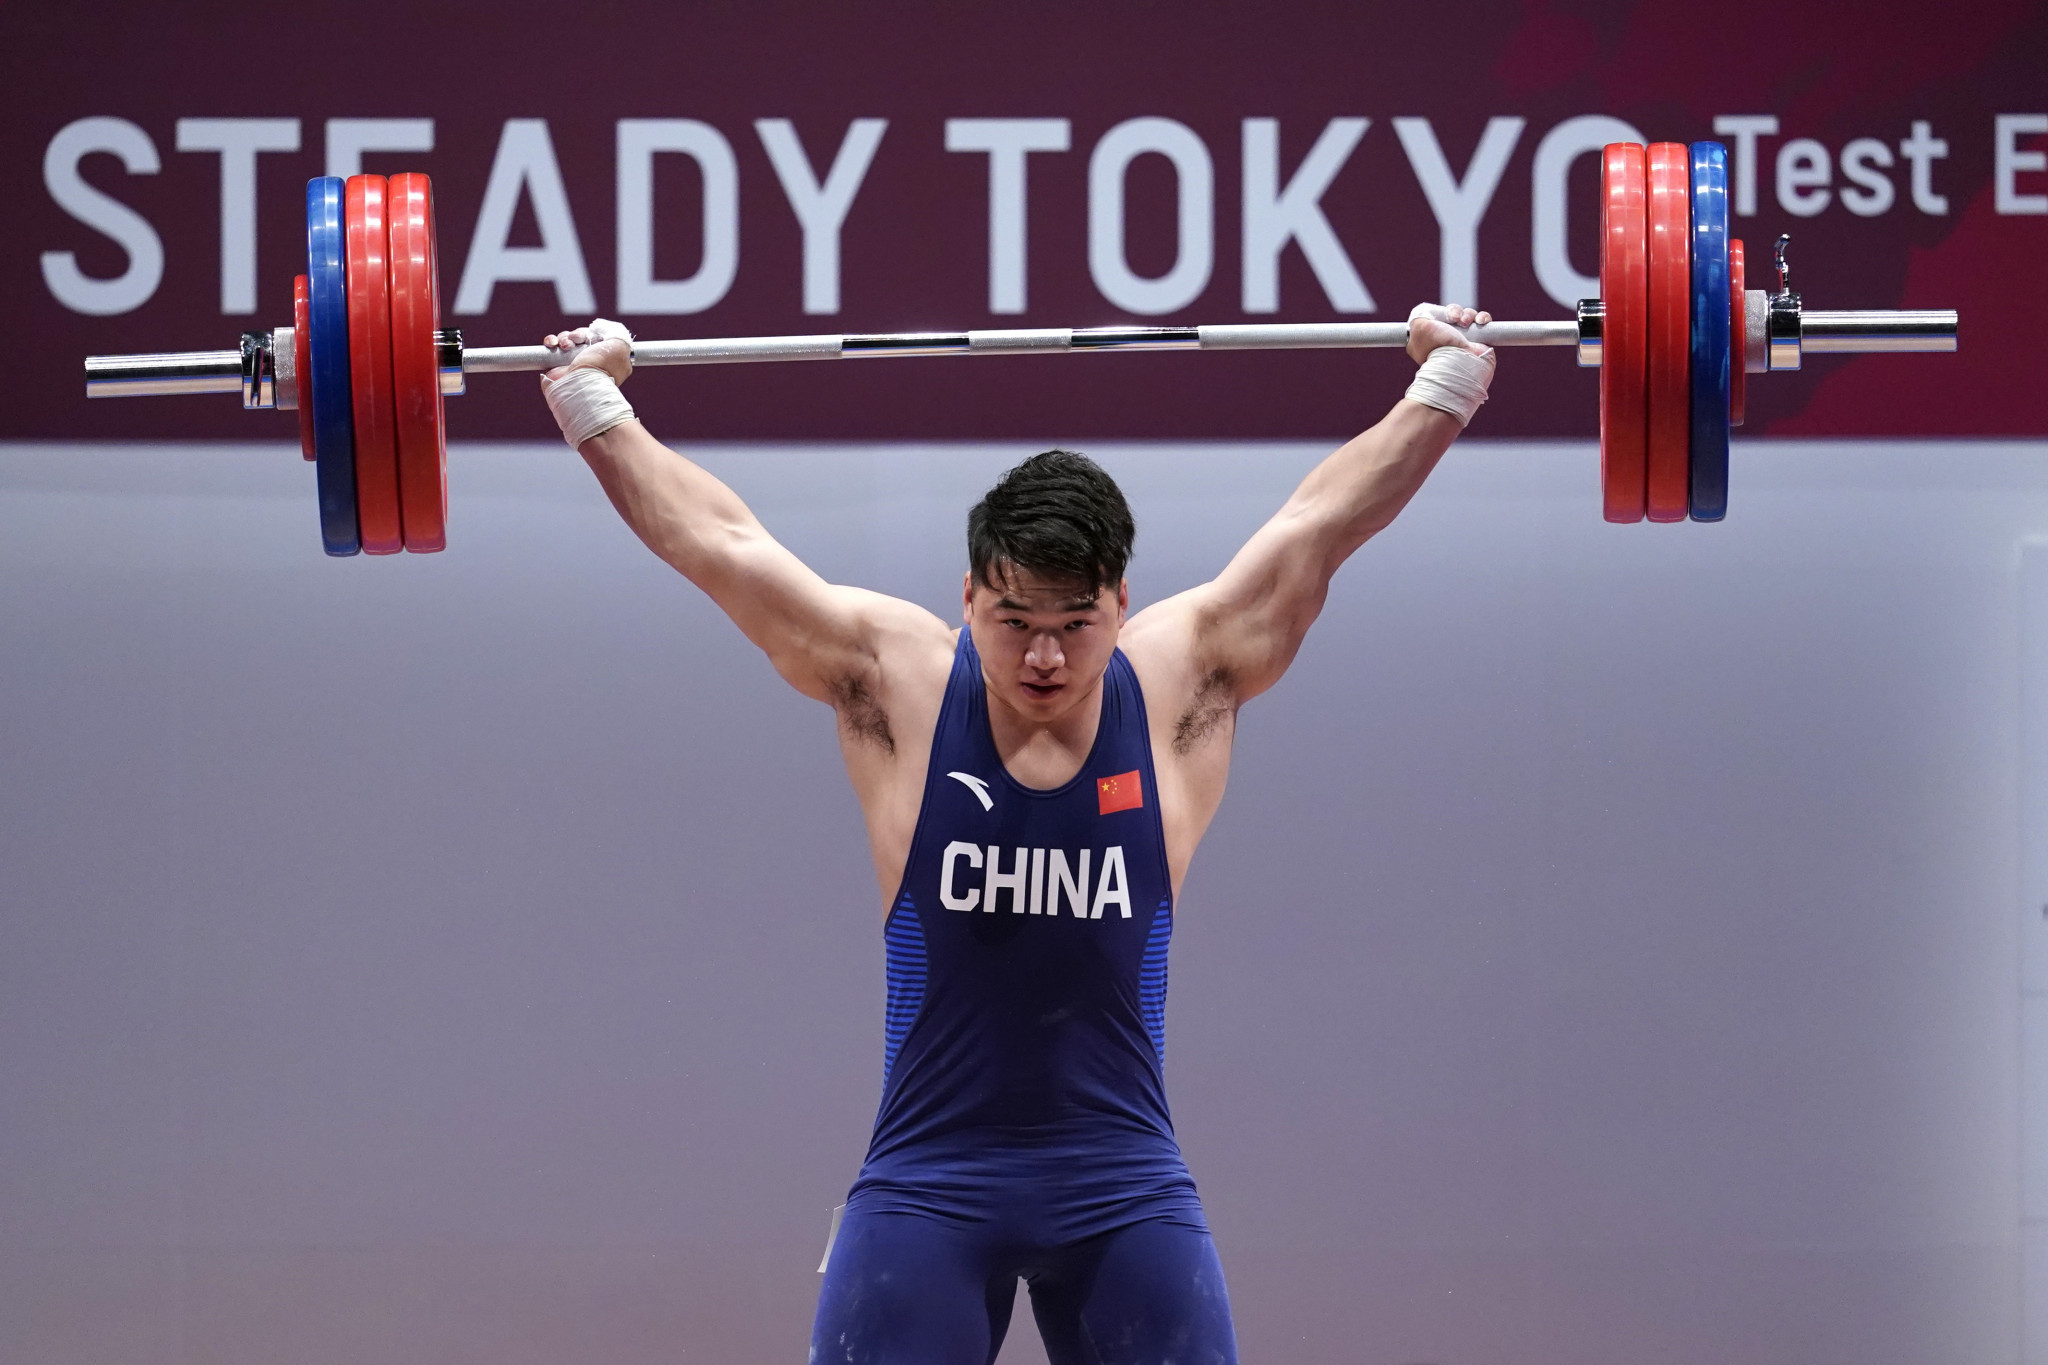 United States and Colombia on medals trail as Chinese weightlifters swarm to top of Olympic rankings lists 